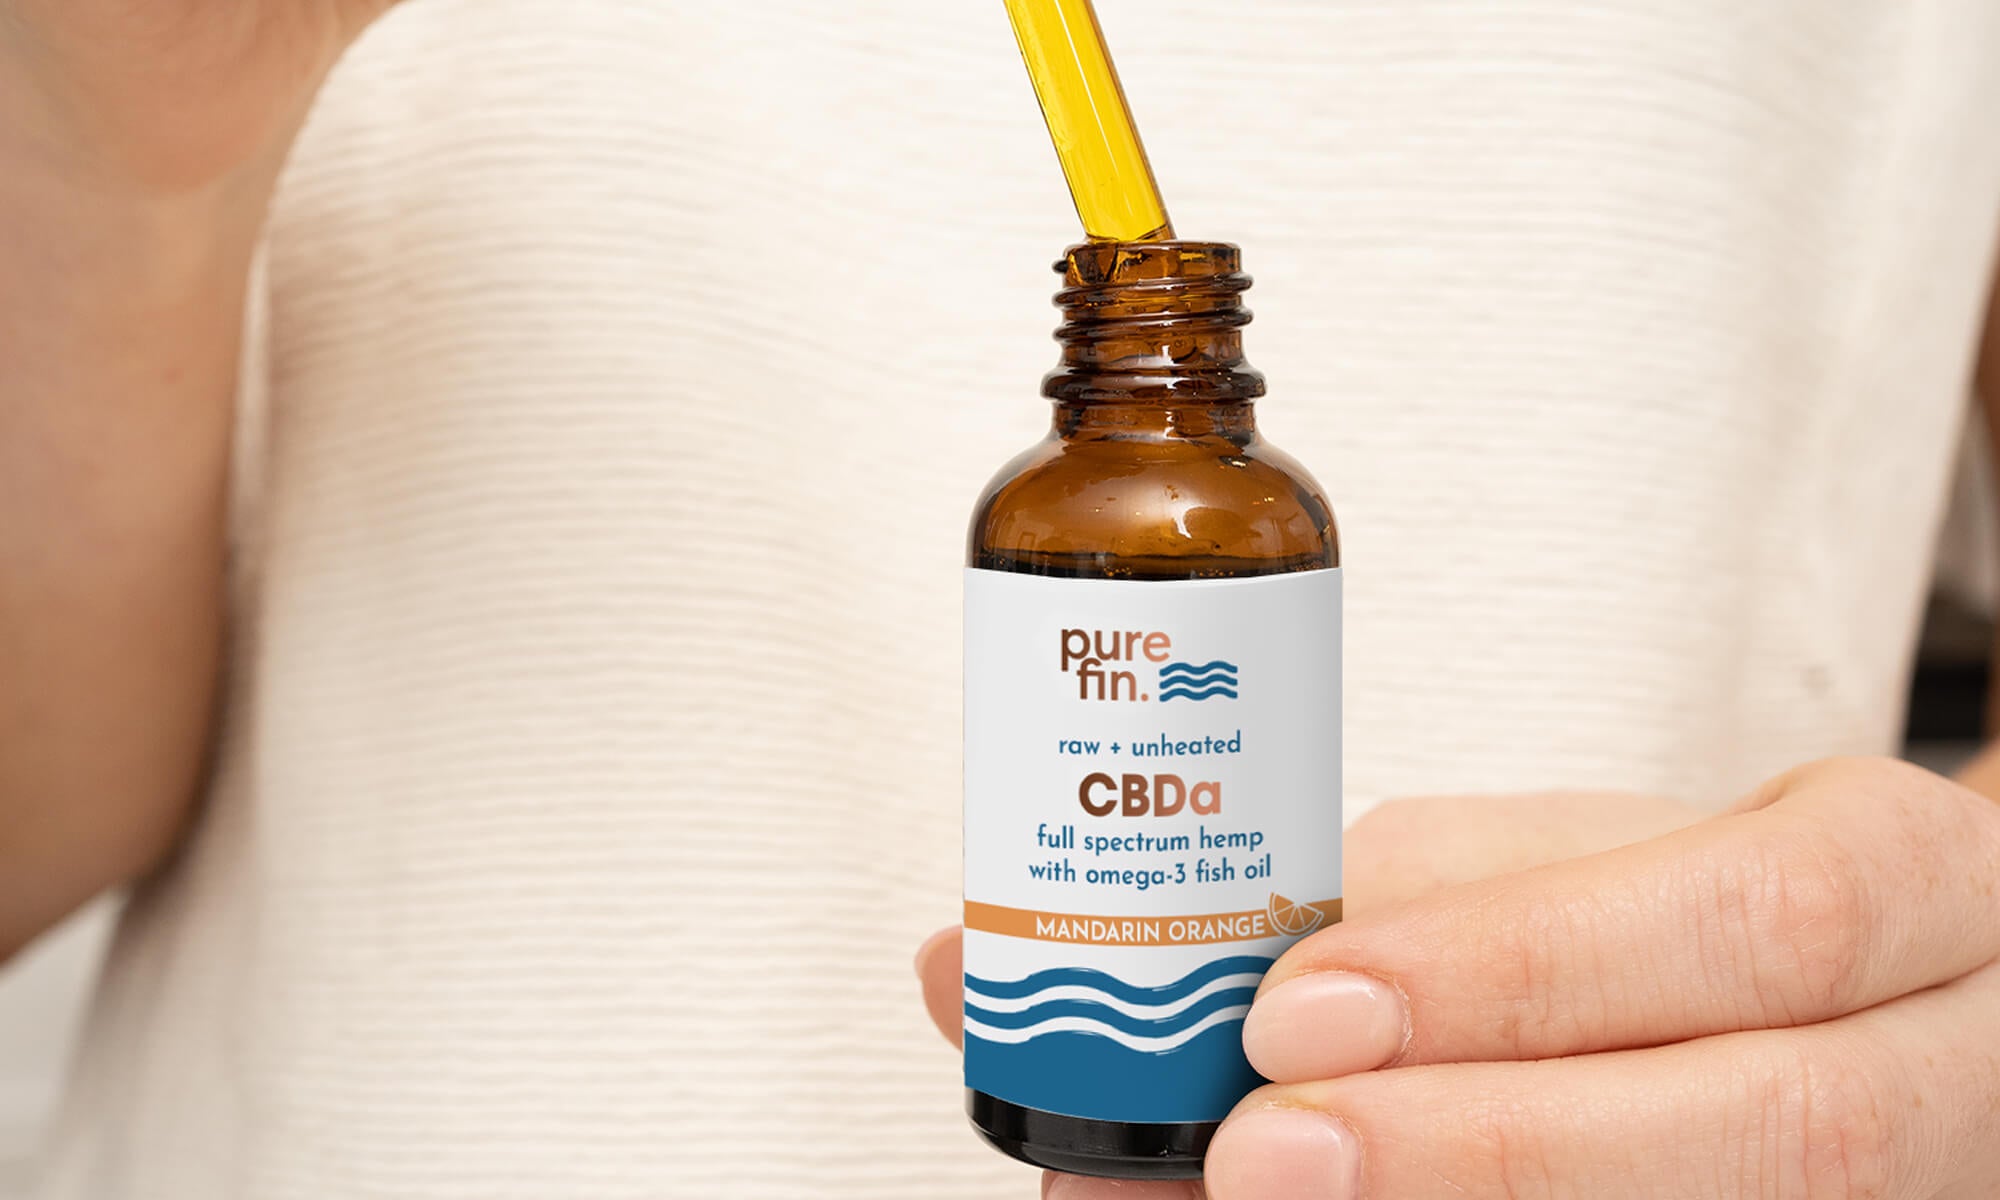 How to incorporate CBD oil into your daily routine